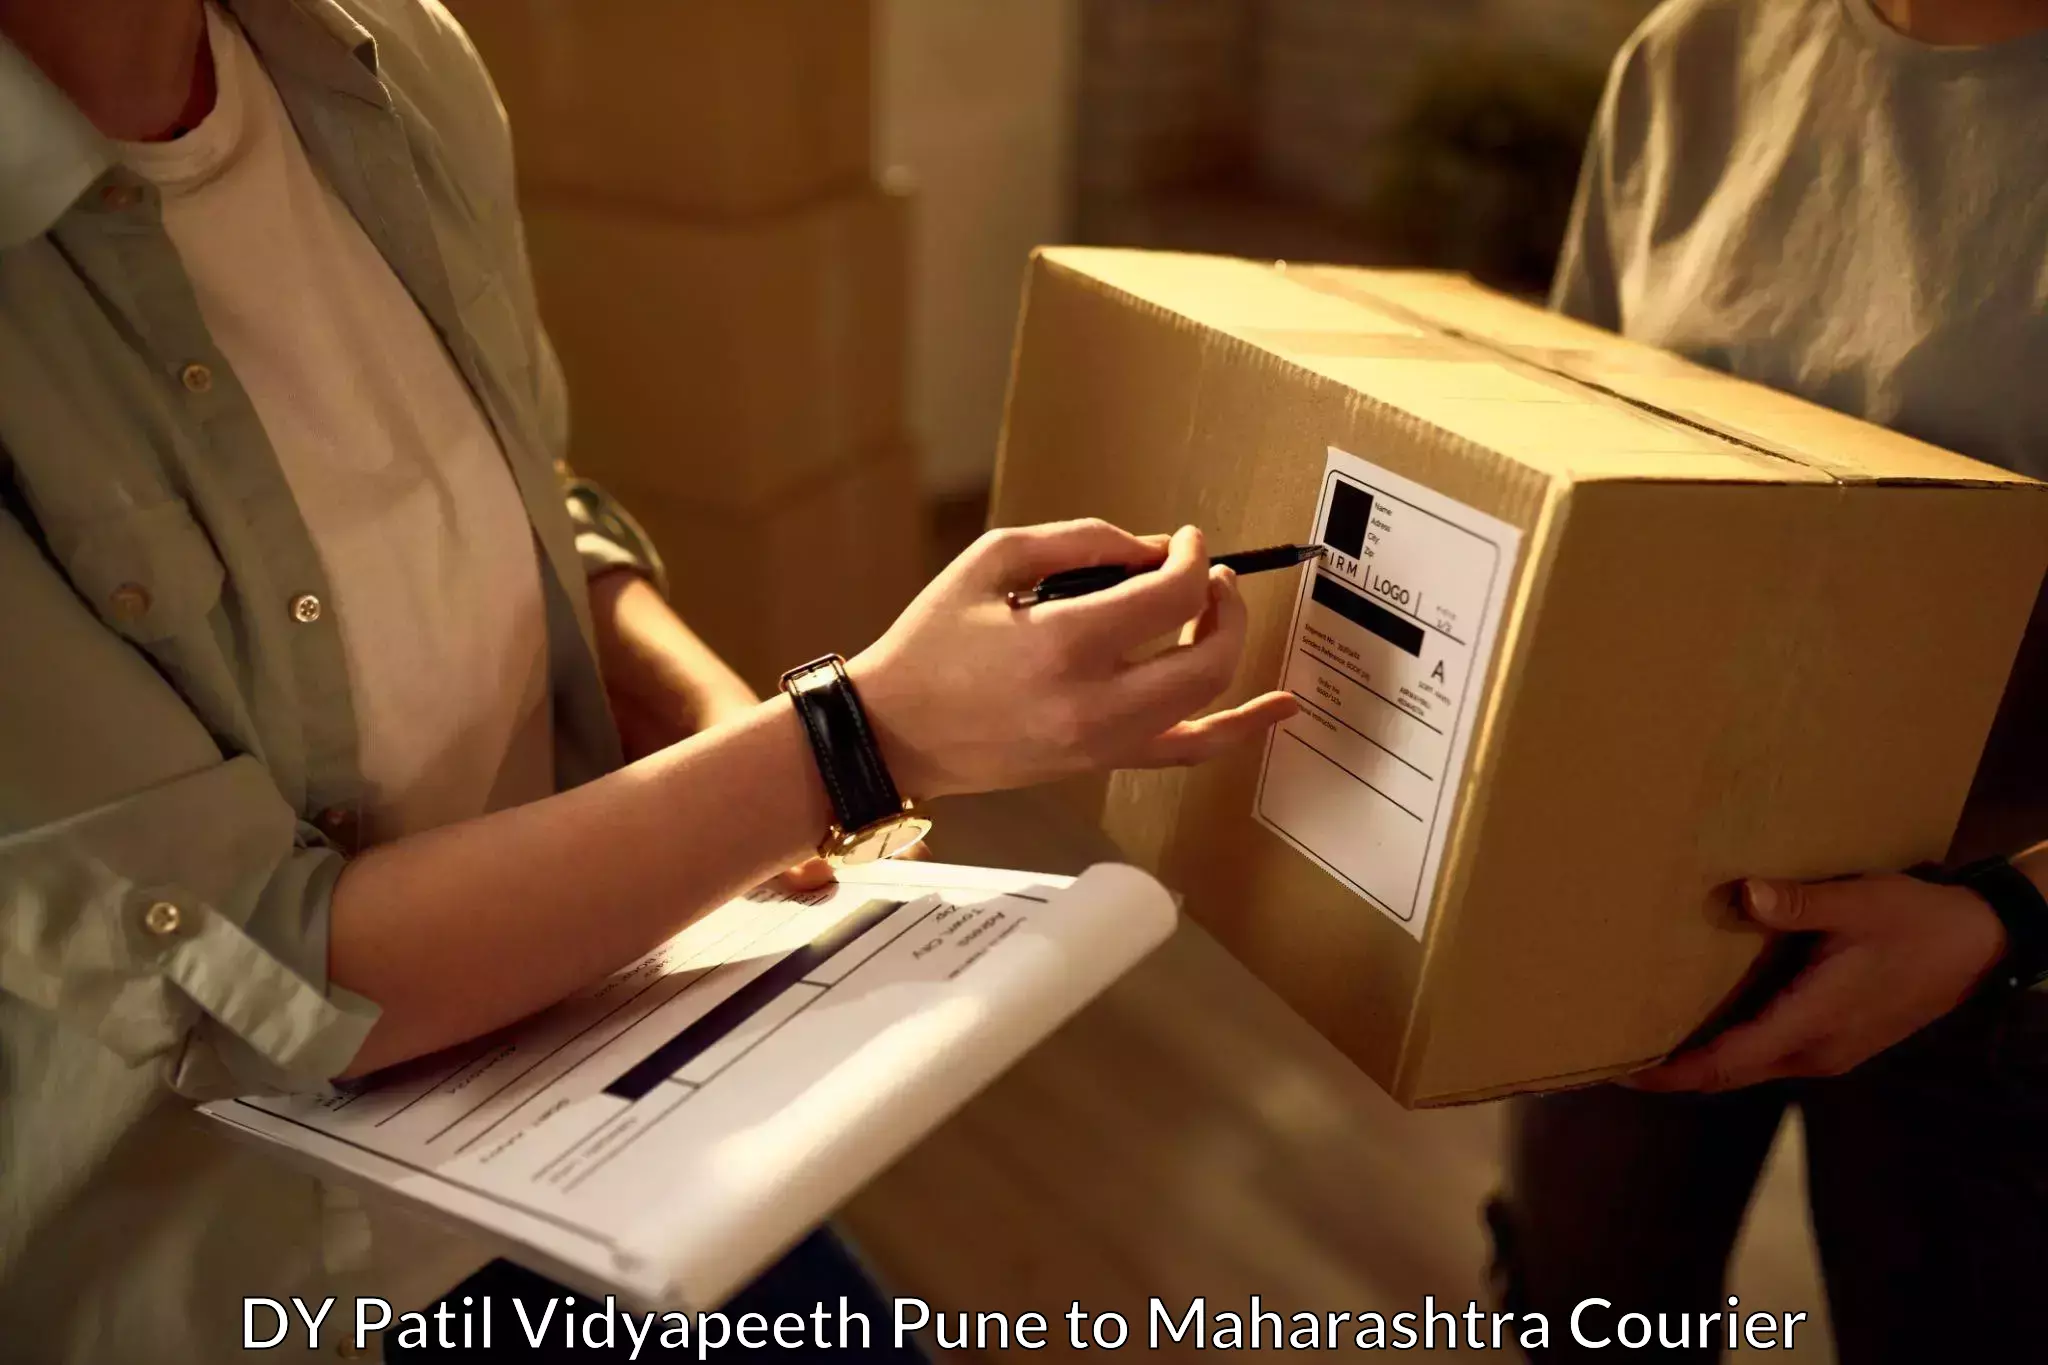 Specialized courier services DY Patil Vidyapeeth Pune to Savitribai Phule Pune University